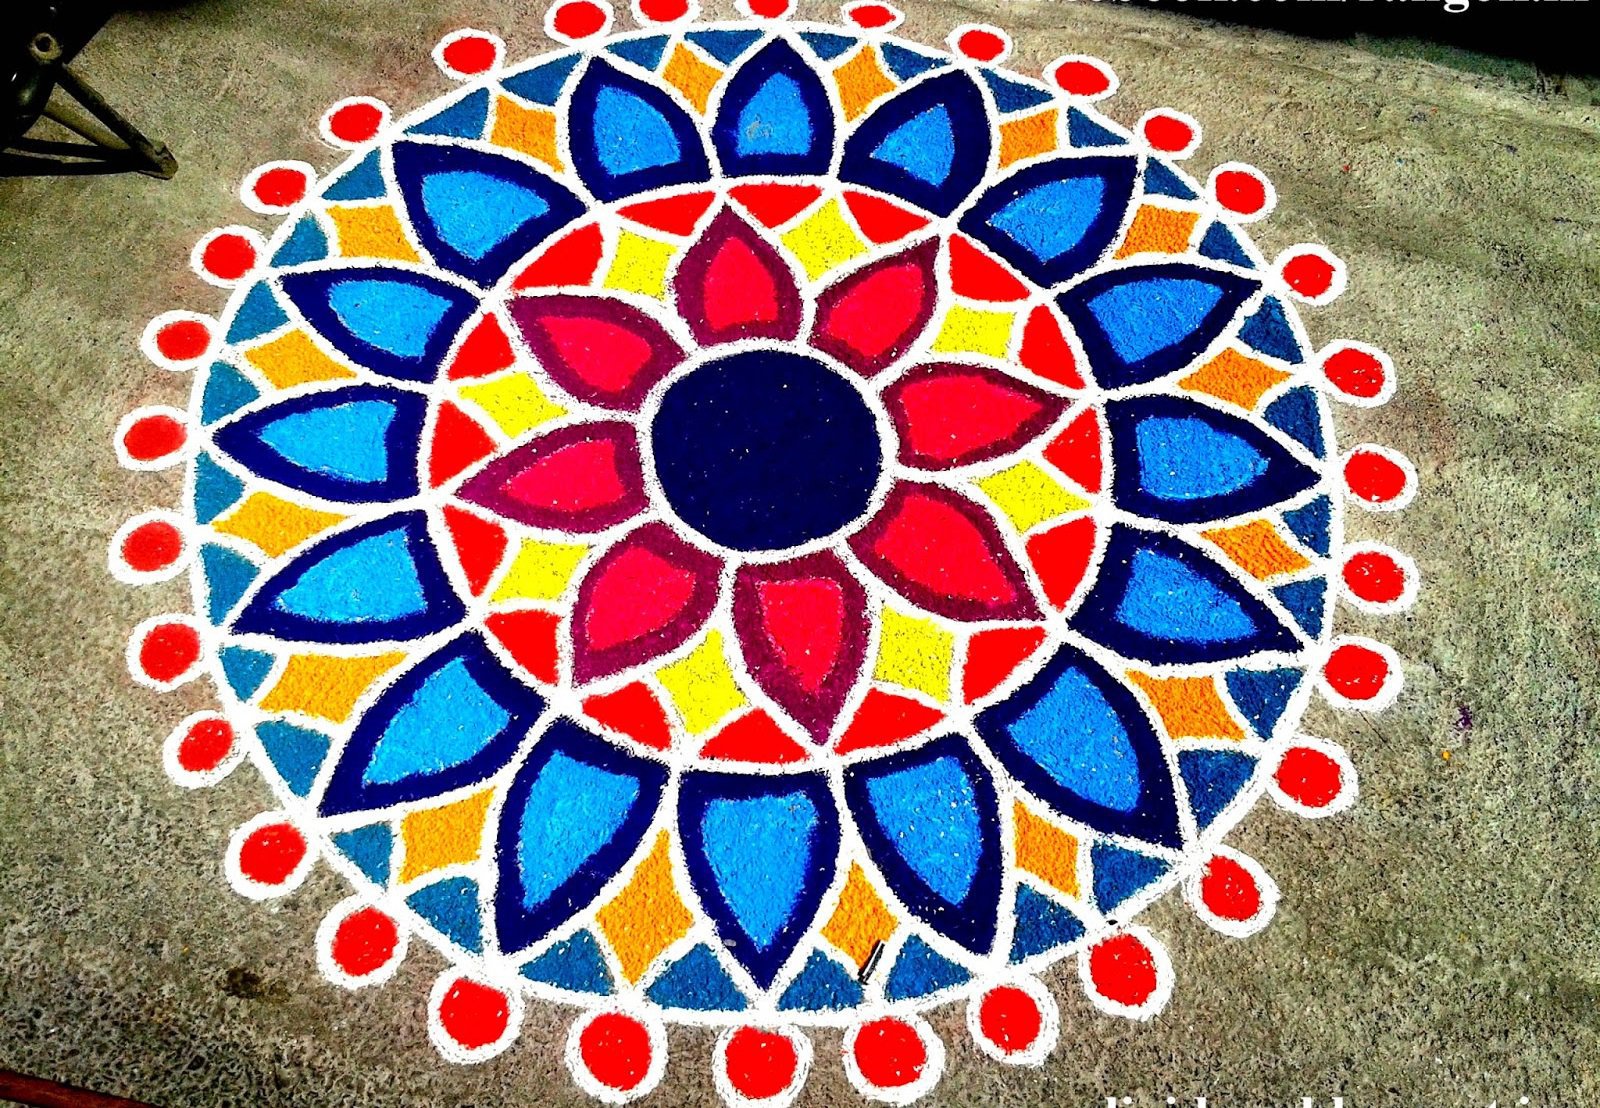 Brighten Up Your Home This Diwali With These 20 EasyToDo Rangoli Designs